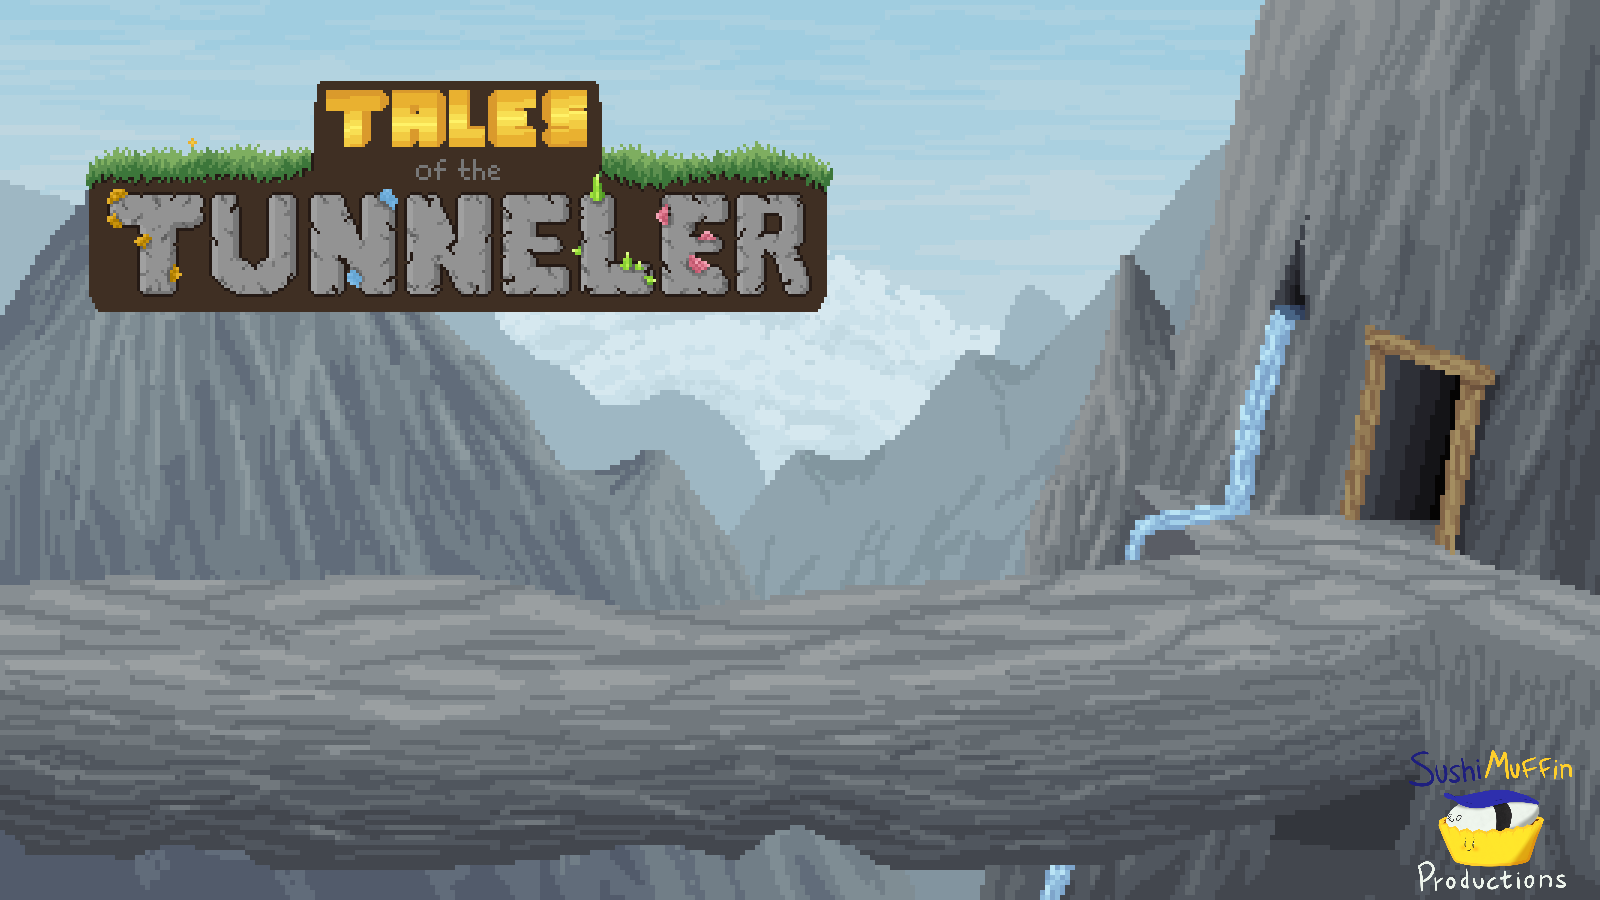 Tales of the Tunneler